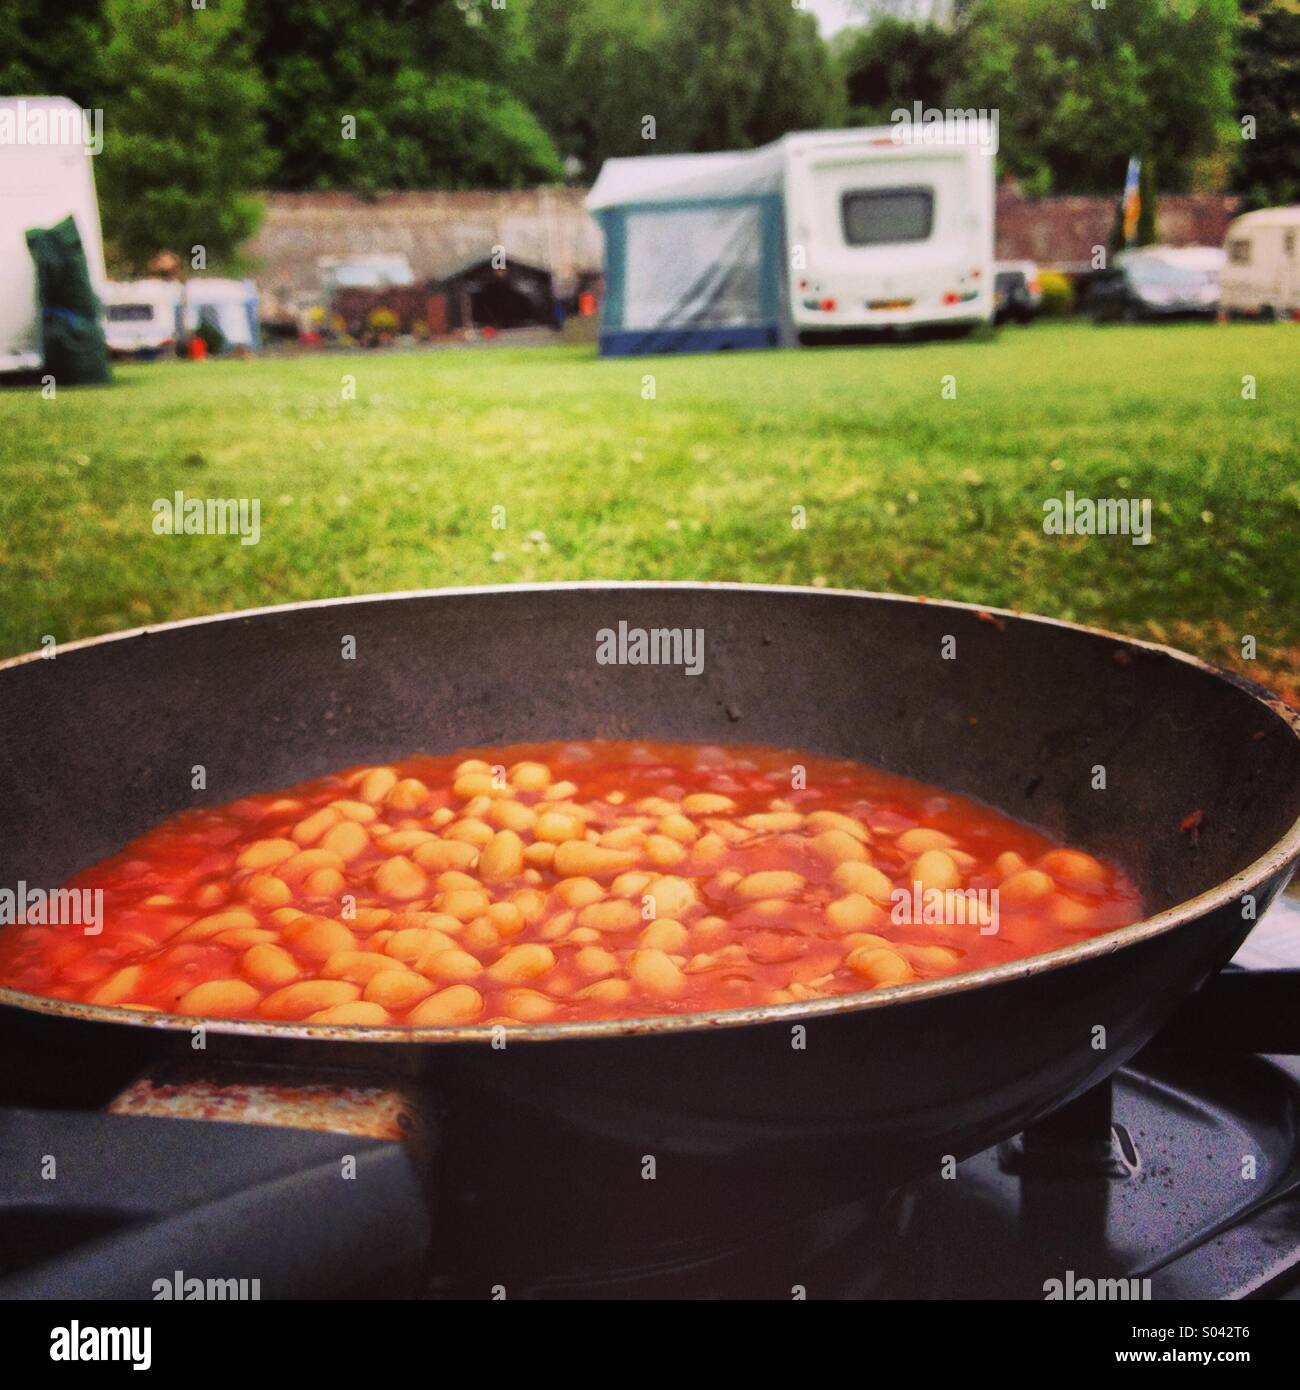 Bsked beans cooking on outdoor stove in camp site. Stock Photo